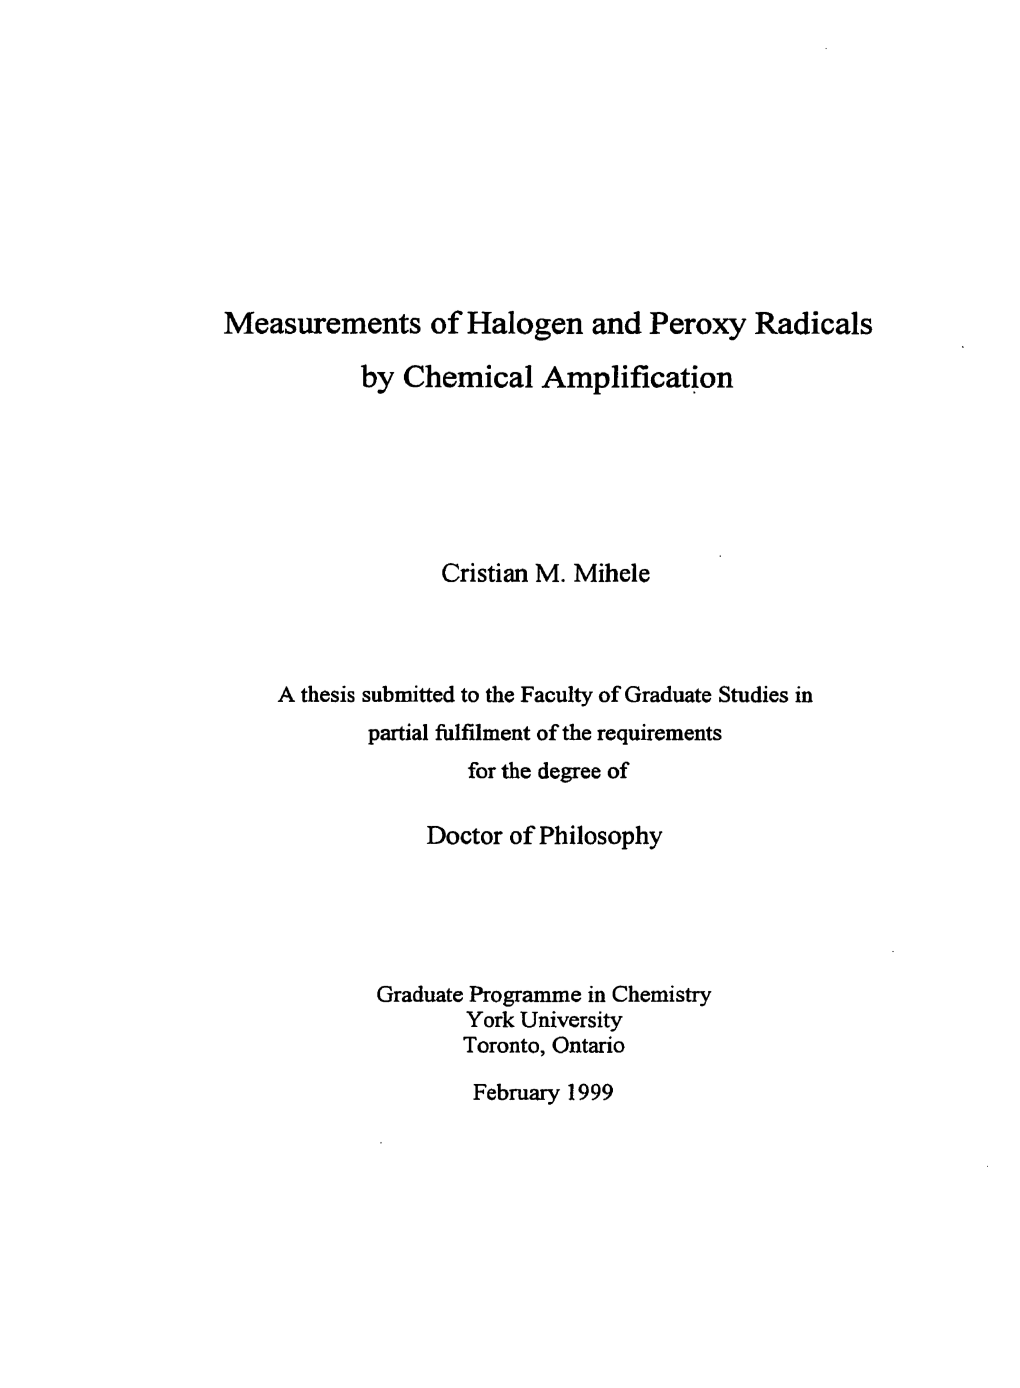 Measurements of Halogen and Peroxy Radicals by Chemical Amplification